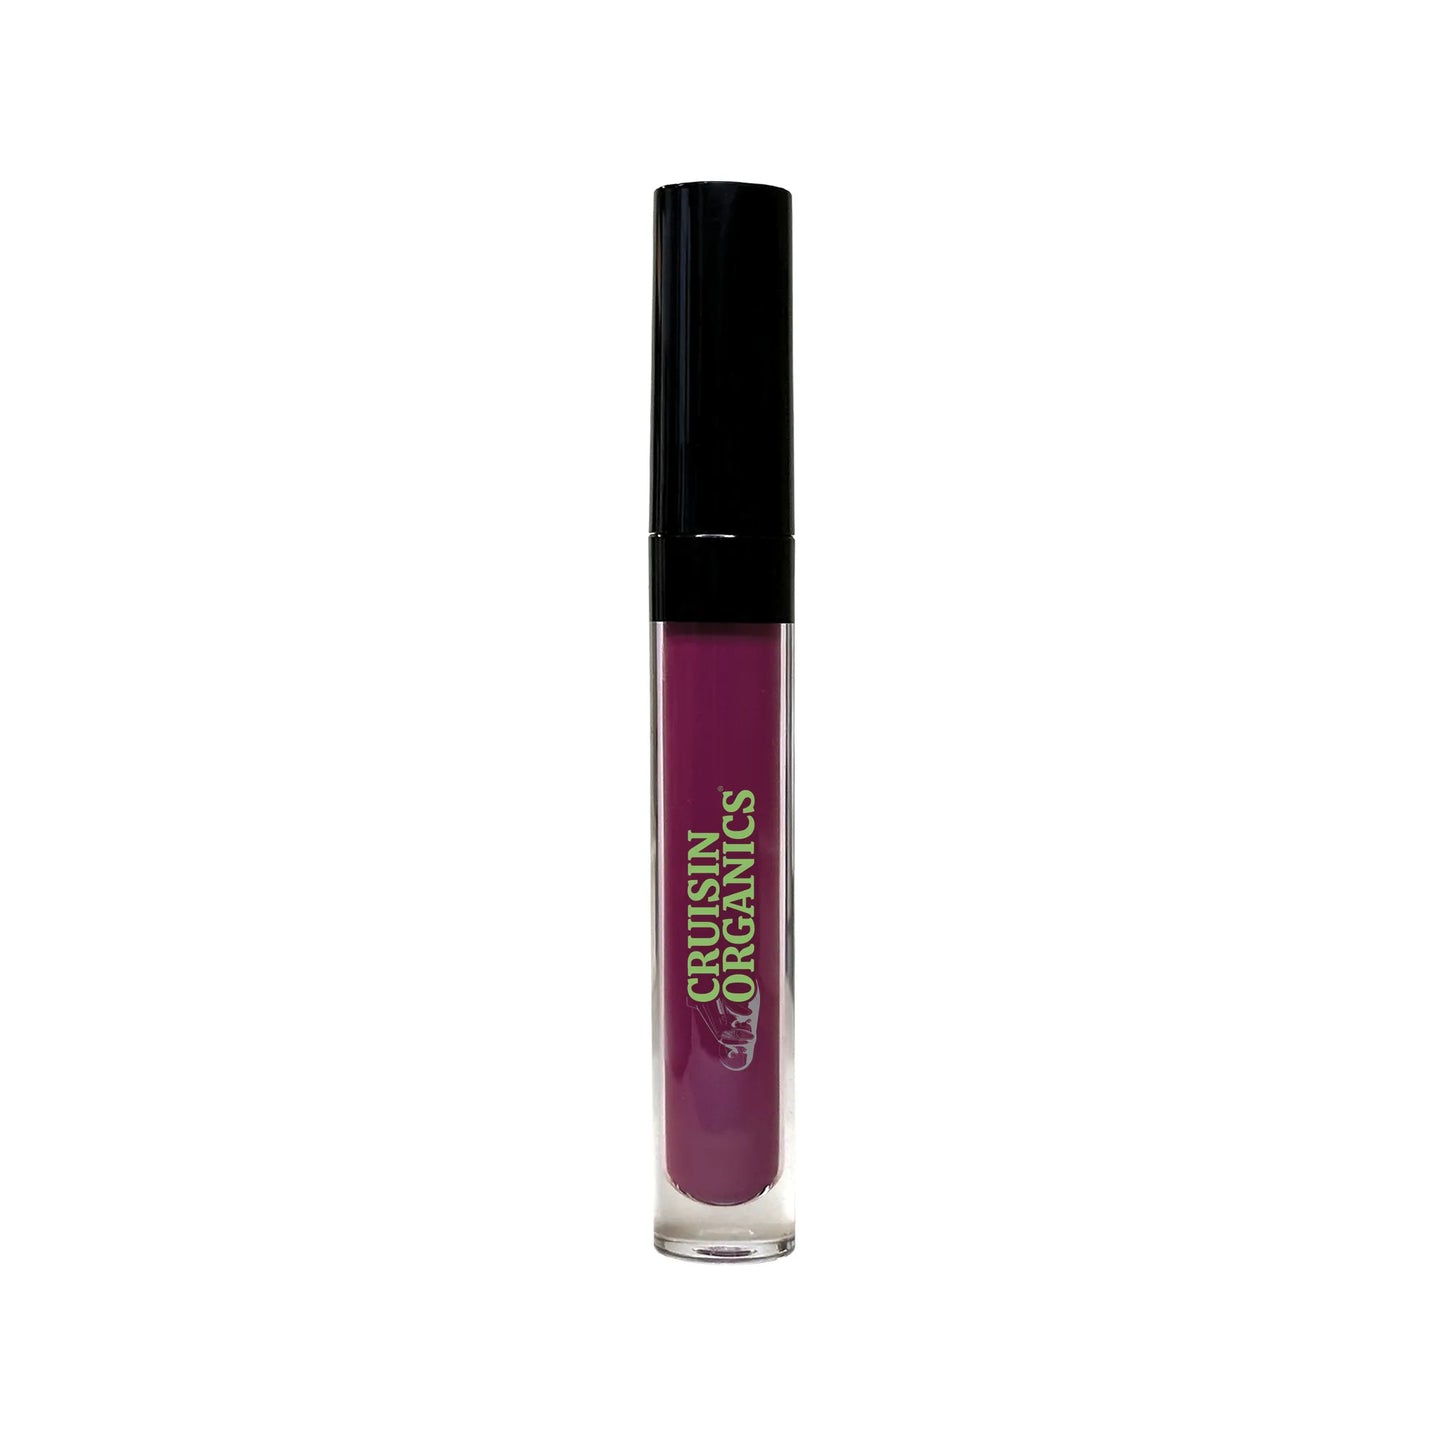 "Get ready to cruise with Cruisin Organics Sugar Beet Lipstick! With its velvety finish and crave-worthy scent, our liquid to matte formula provides comfortable all-day wear for any occasion. Plus, the precision applicator makes application a breeze. Rev up your look and enjoy the ride!"